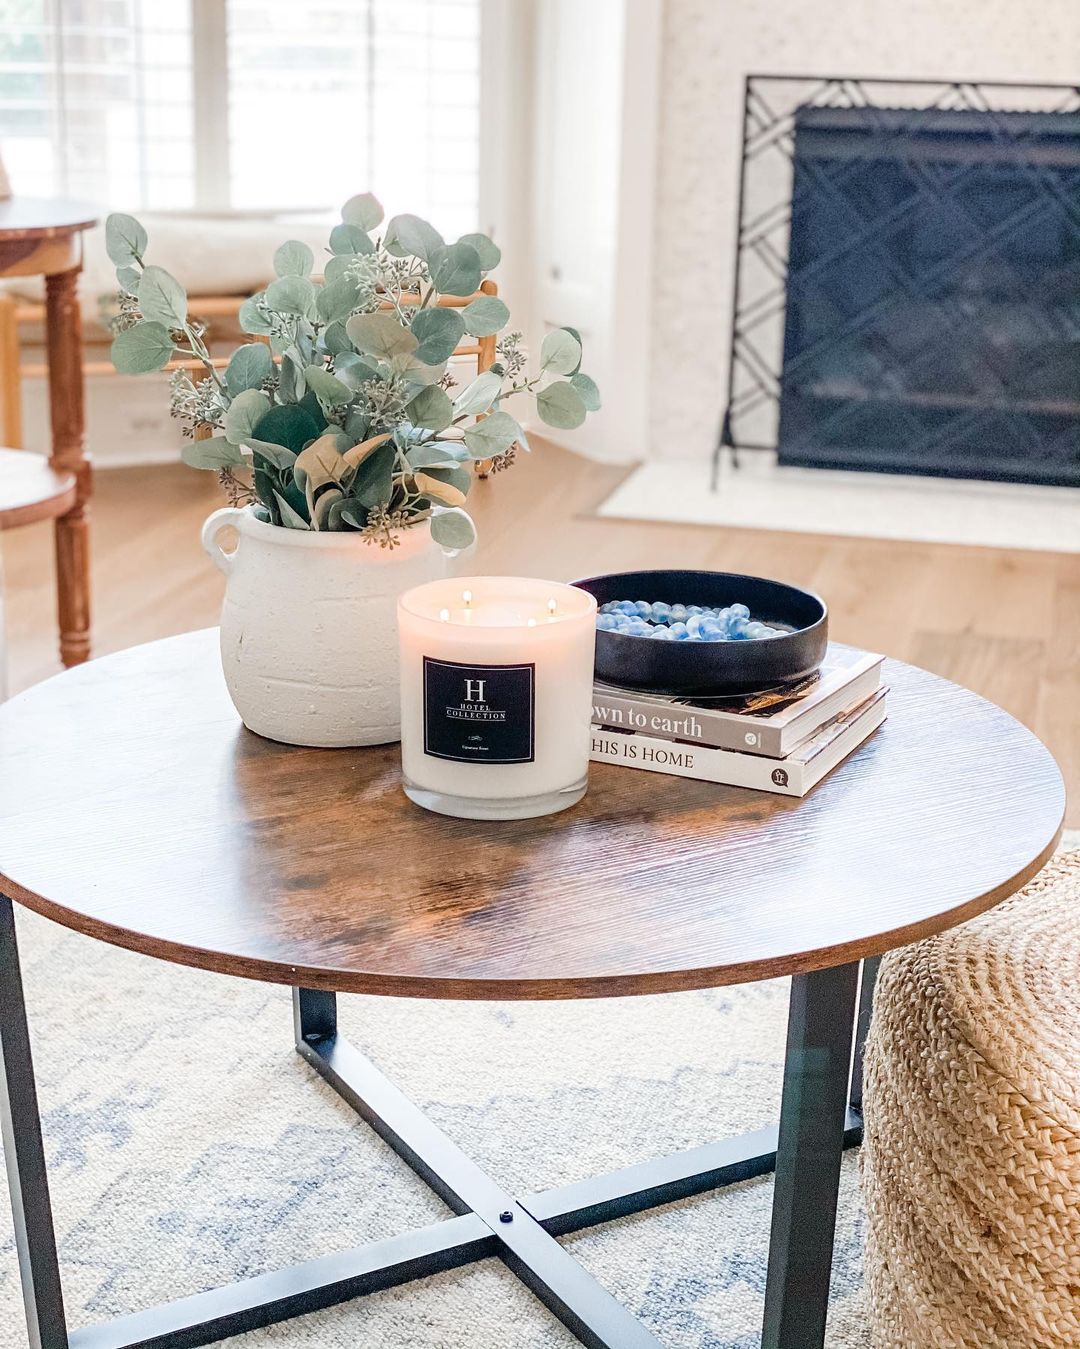 Coffee Table with Plant and Candle on Top. Photo by Instagram user @kayleymillerhome